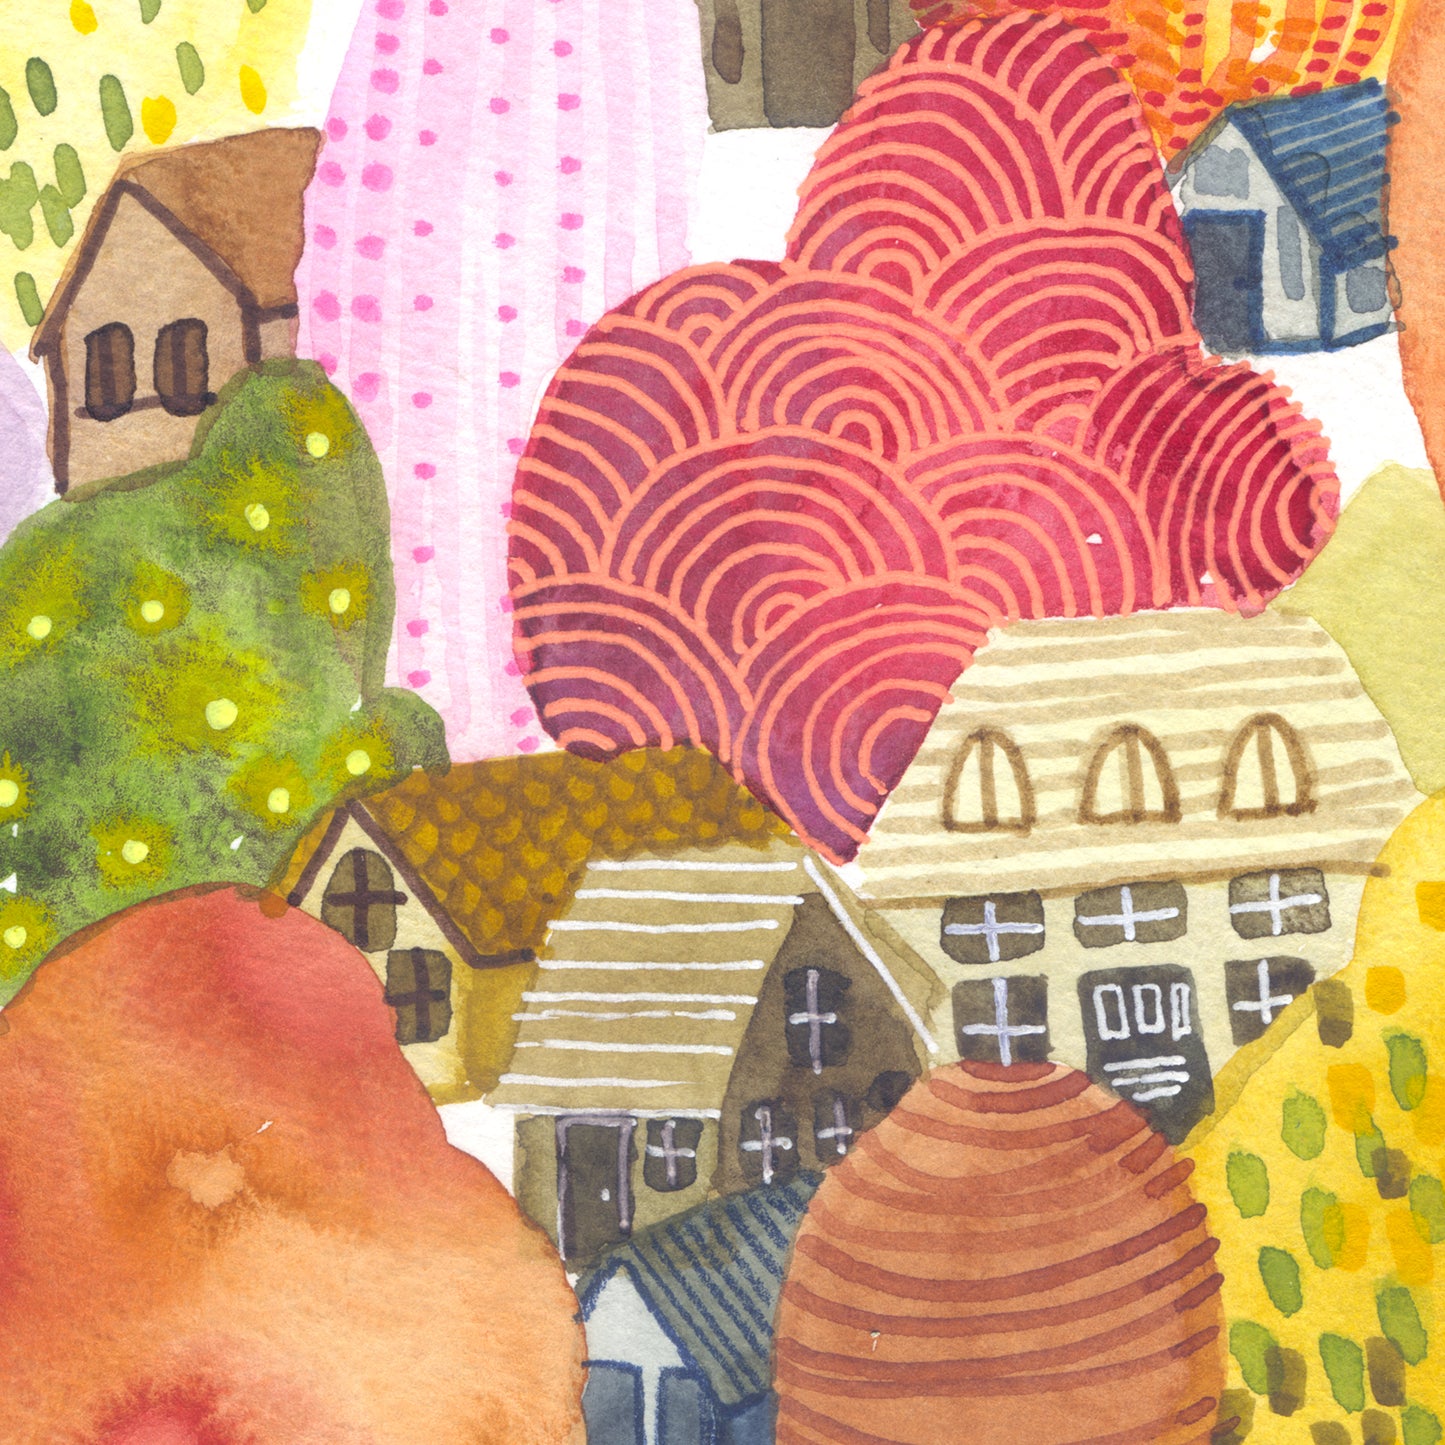 Autumn Village - Signed and Numbered Limited Edition Print.